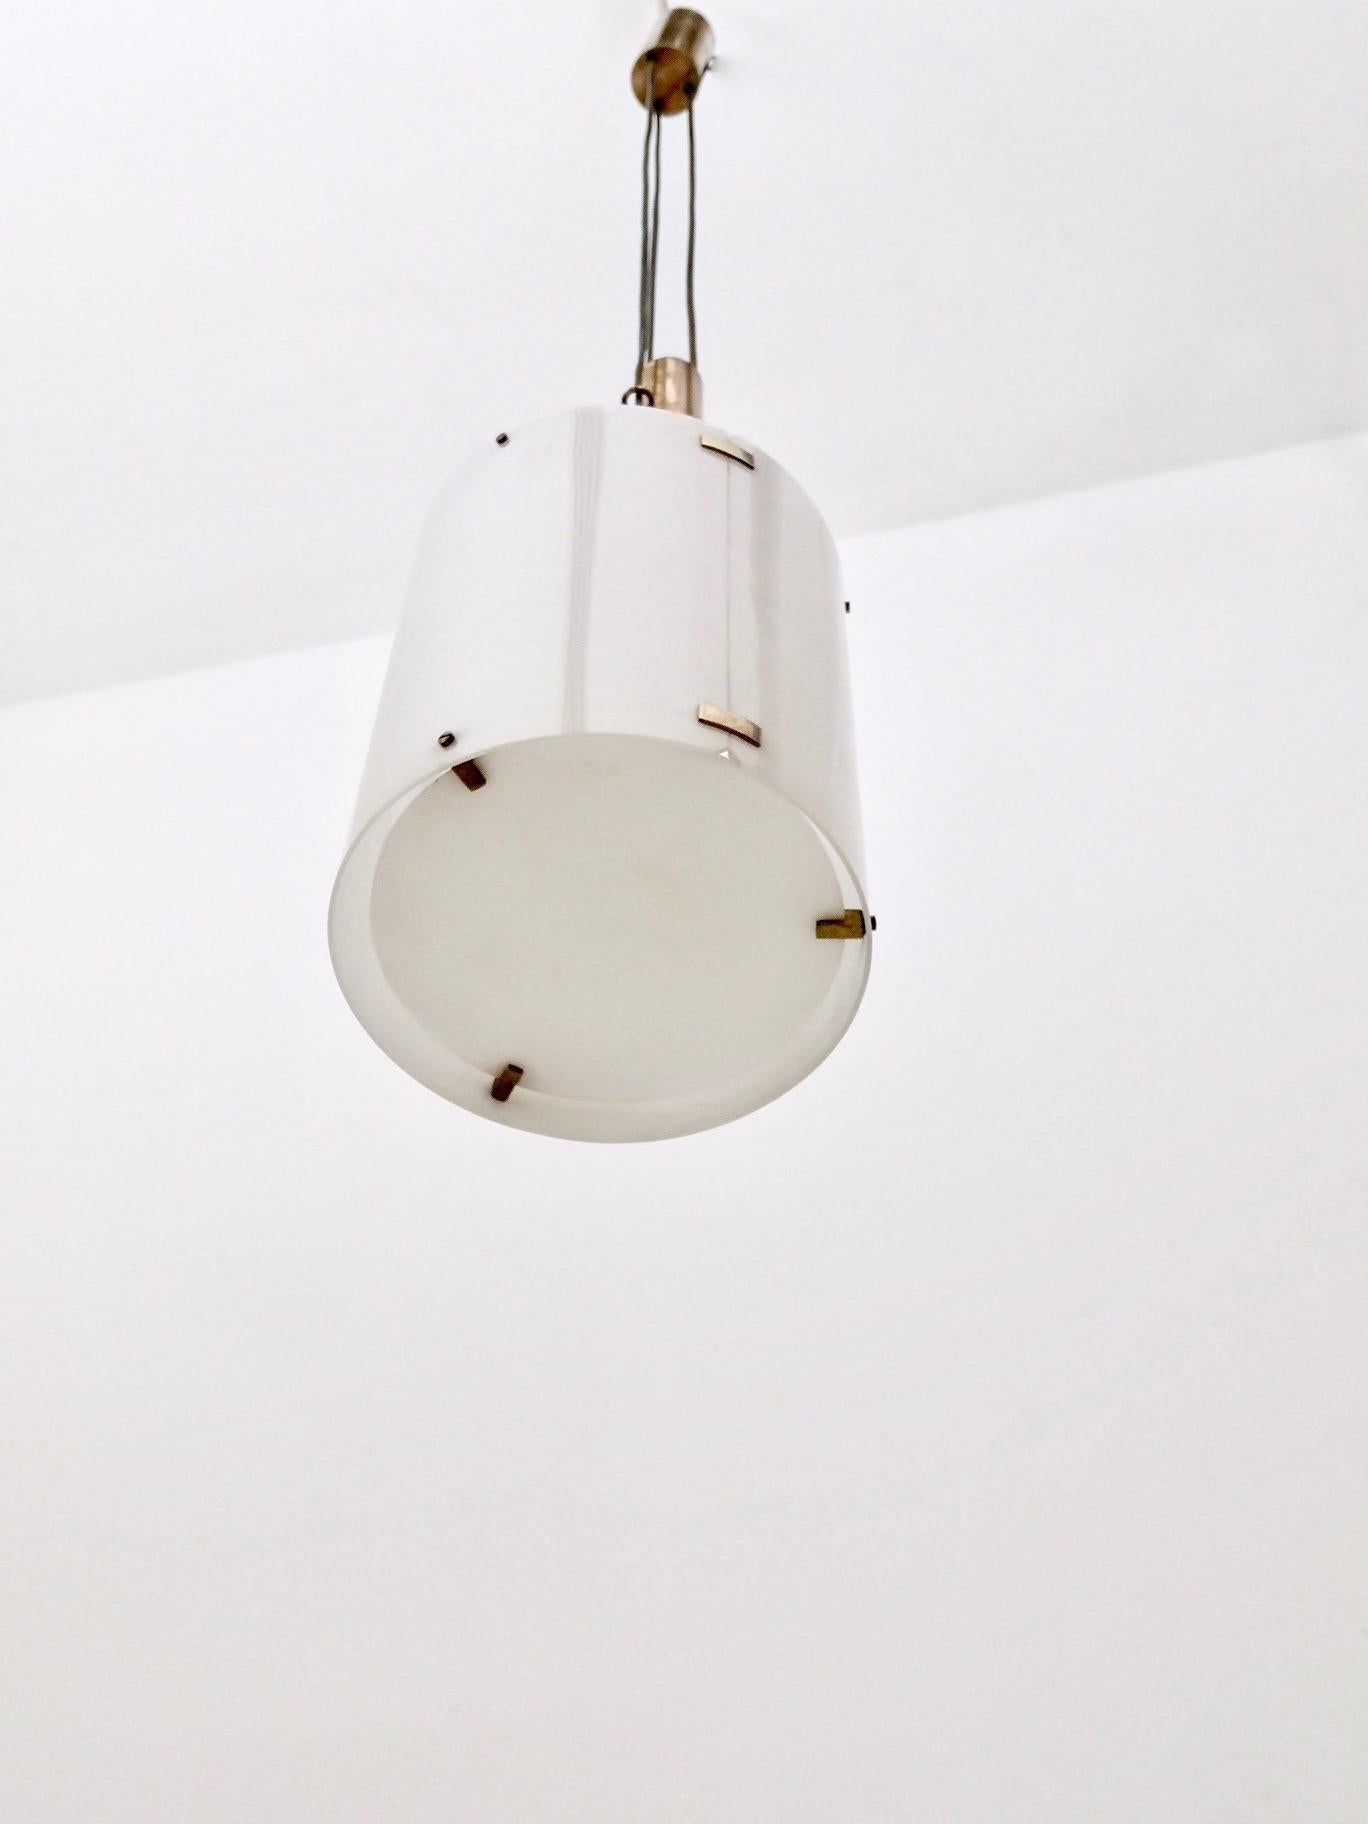 Midcentury Adjustable Pendant Mod. 437 by Tito Agnoli Produced by O-Luce, 1954 1